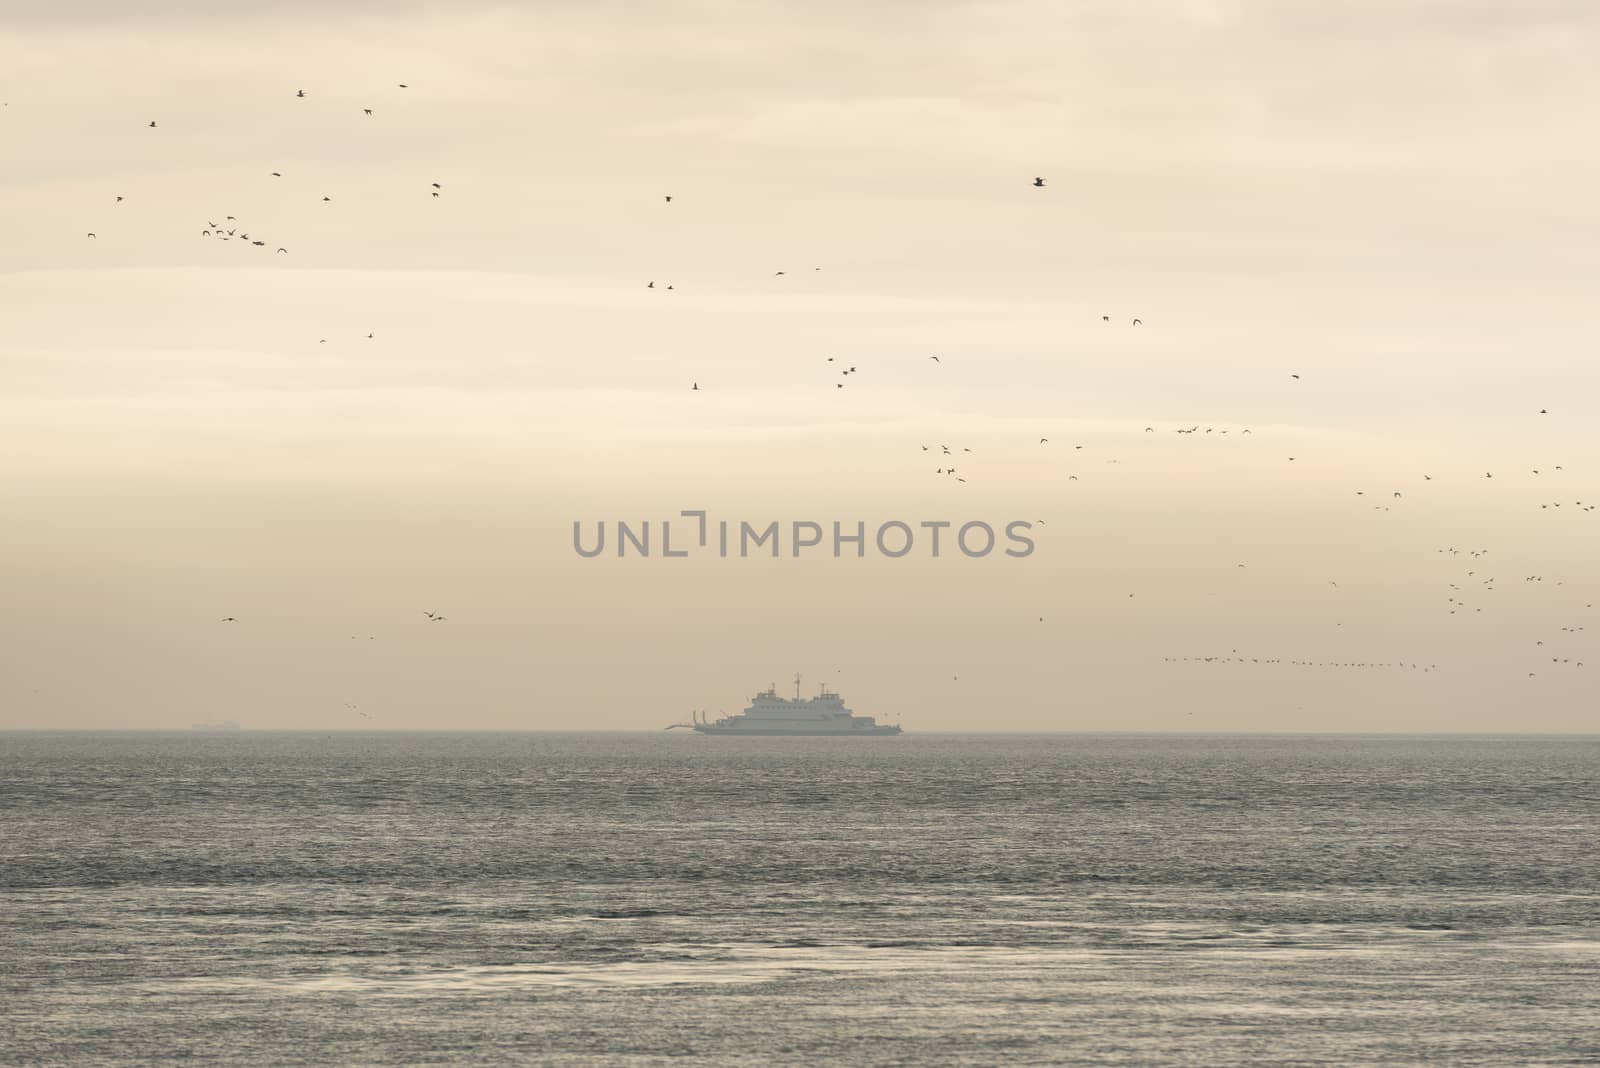 Old ferry on the Wadden Sea surrounded by birds near the island of Terschelling in the Netherlands in the evening sun
